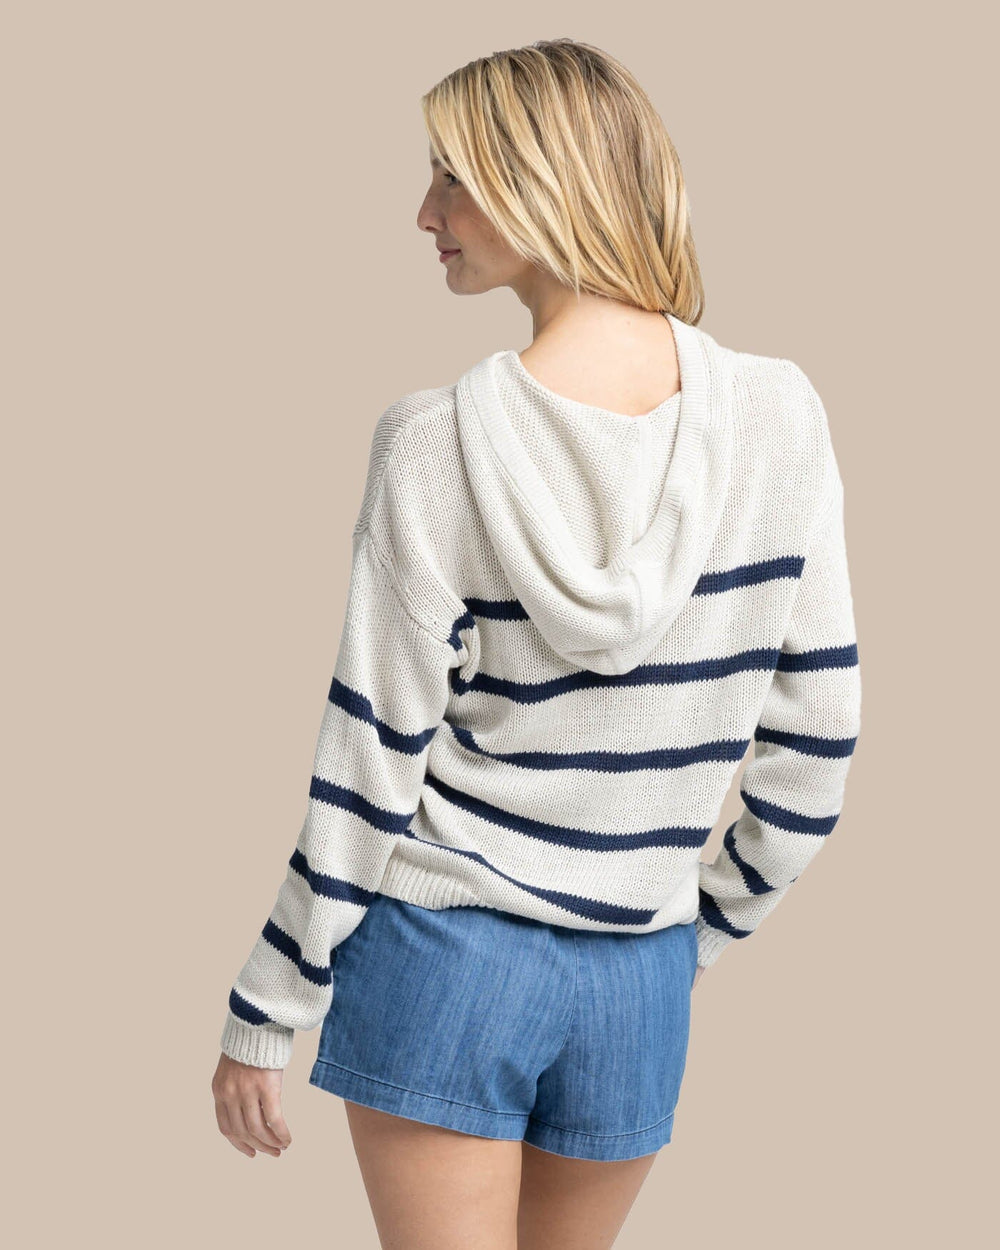 The back view of the Southern Tide Everlee Striped Hoodie Sweater by Southern Tide - Stone